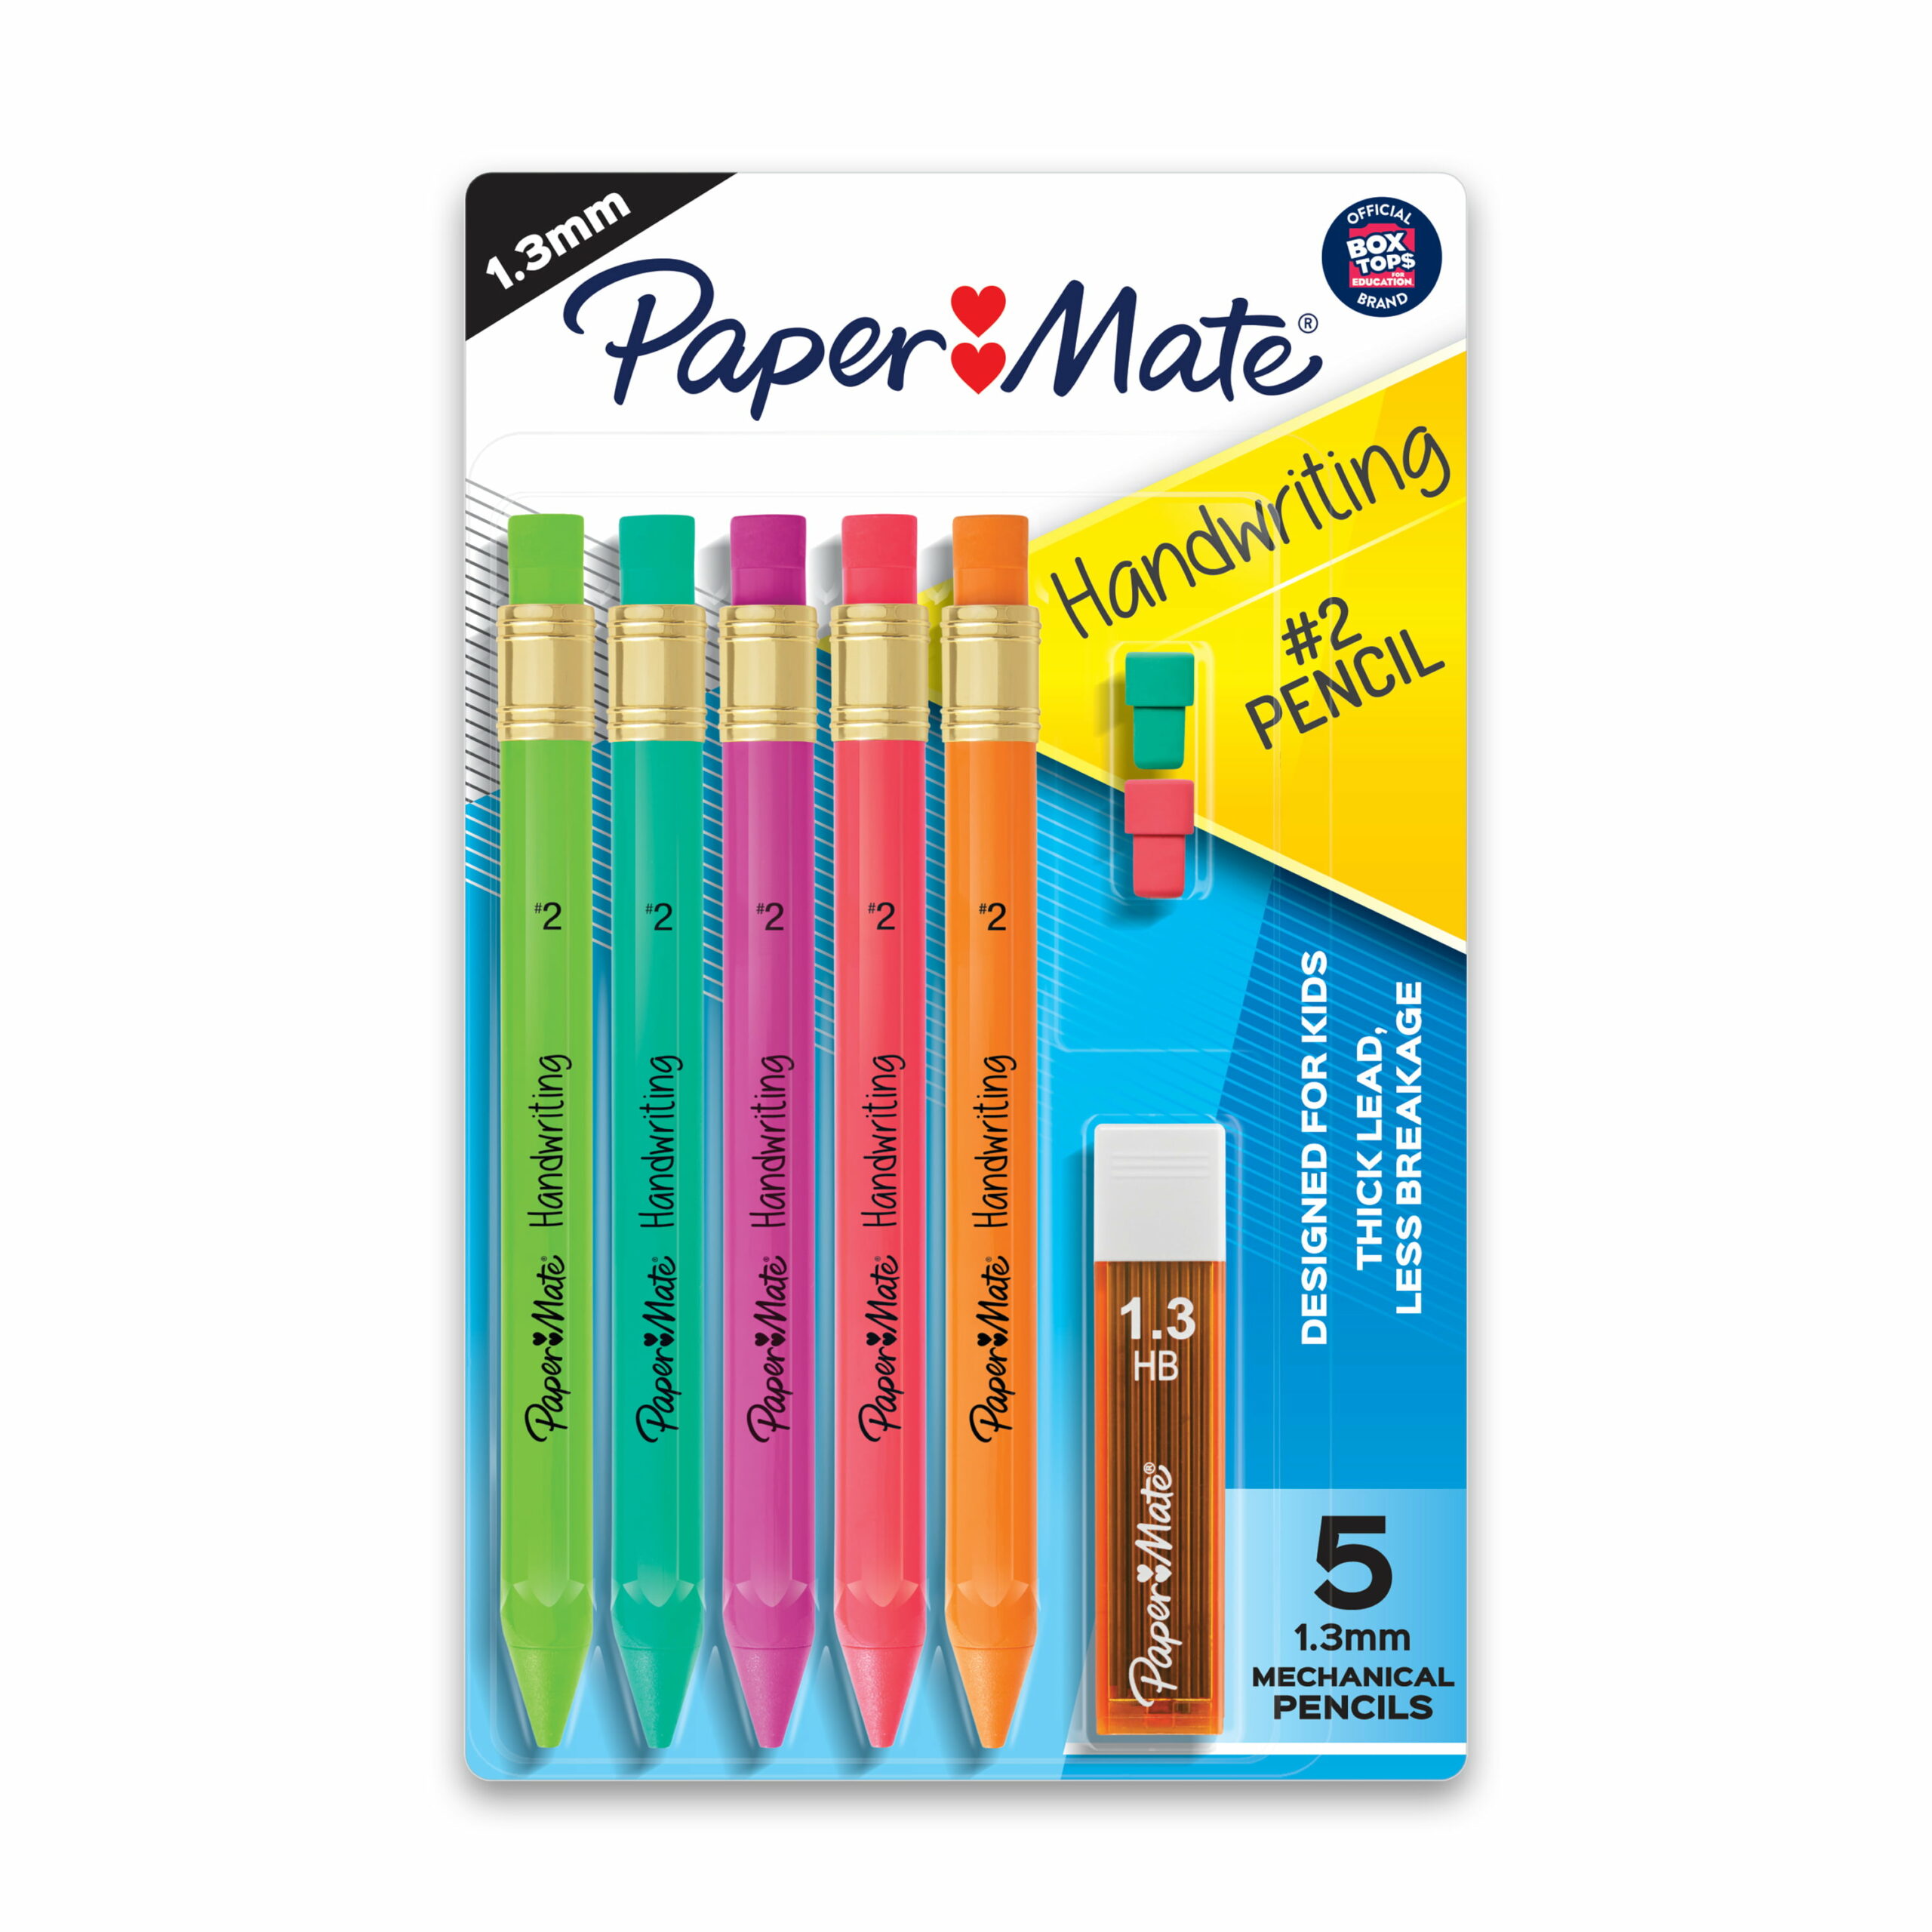 Paper Mate Handwriting Mechanical Pencils - #2 Lead - Thick